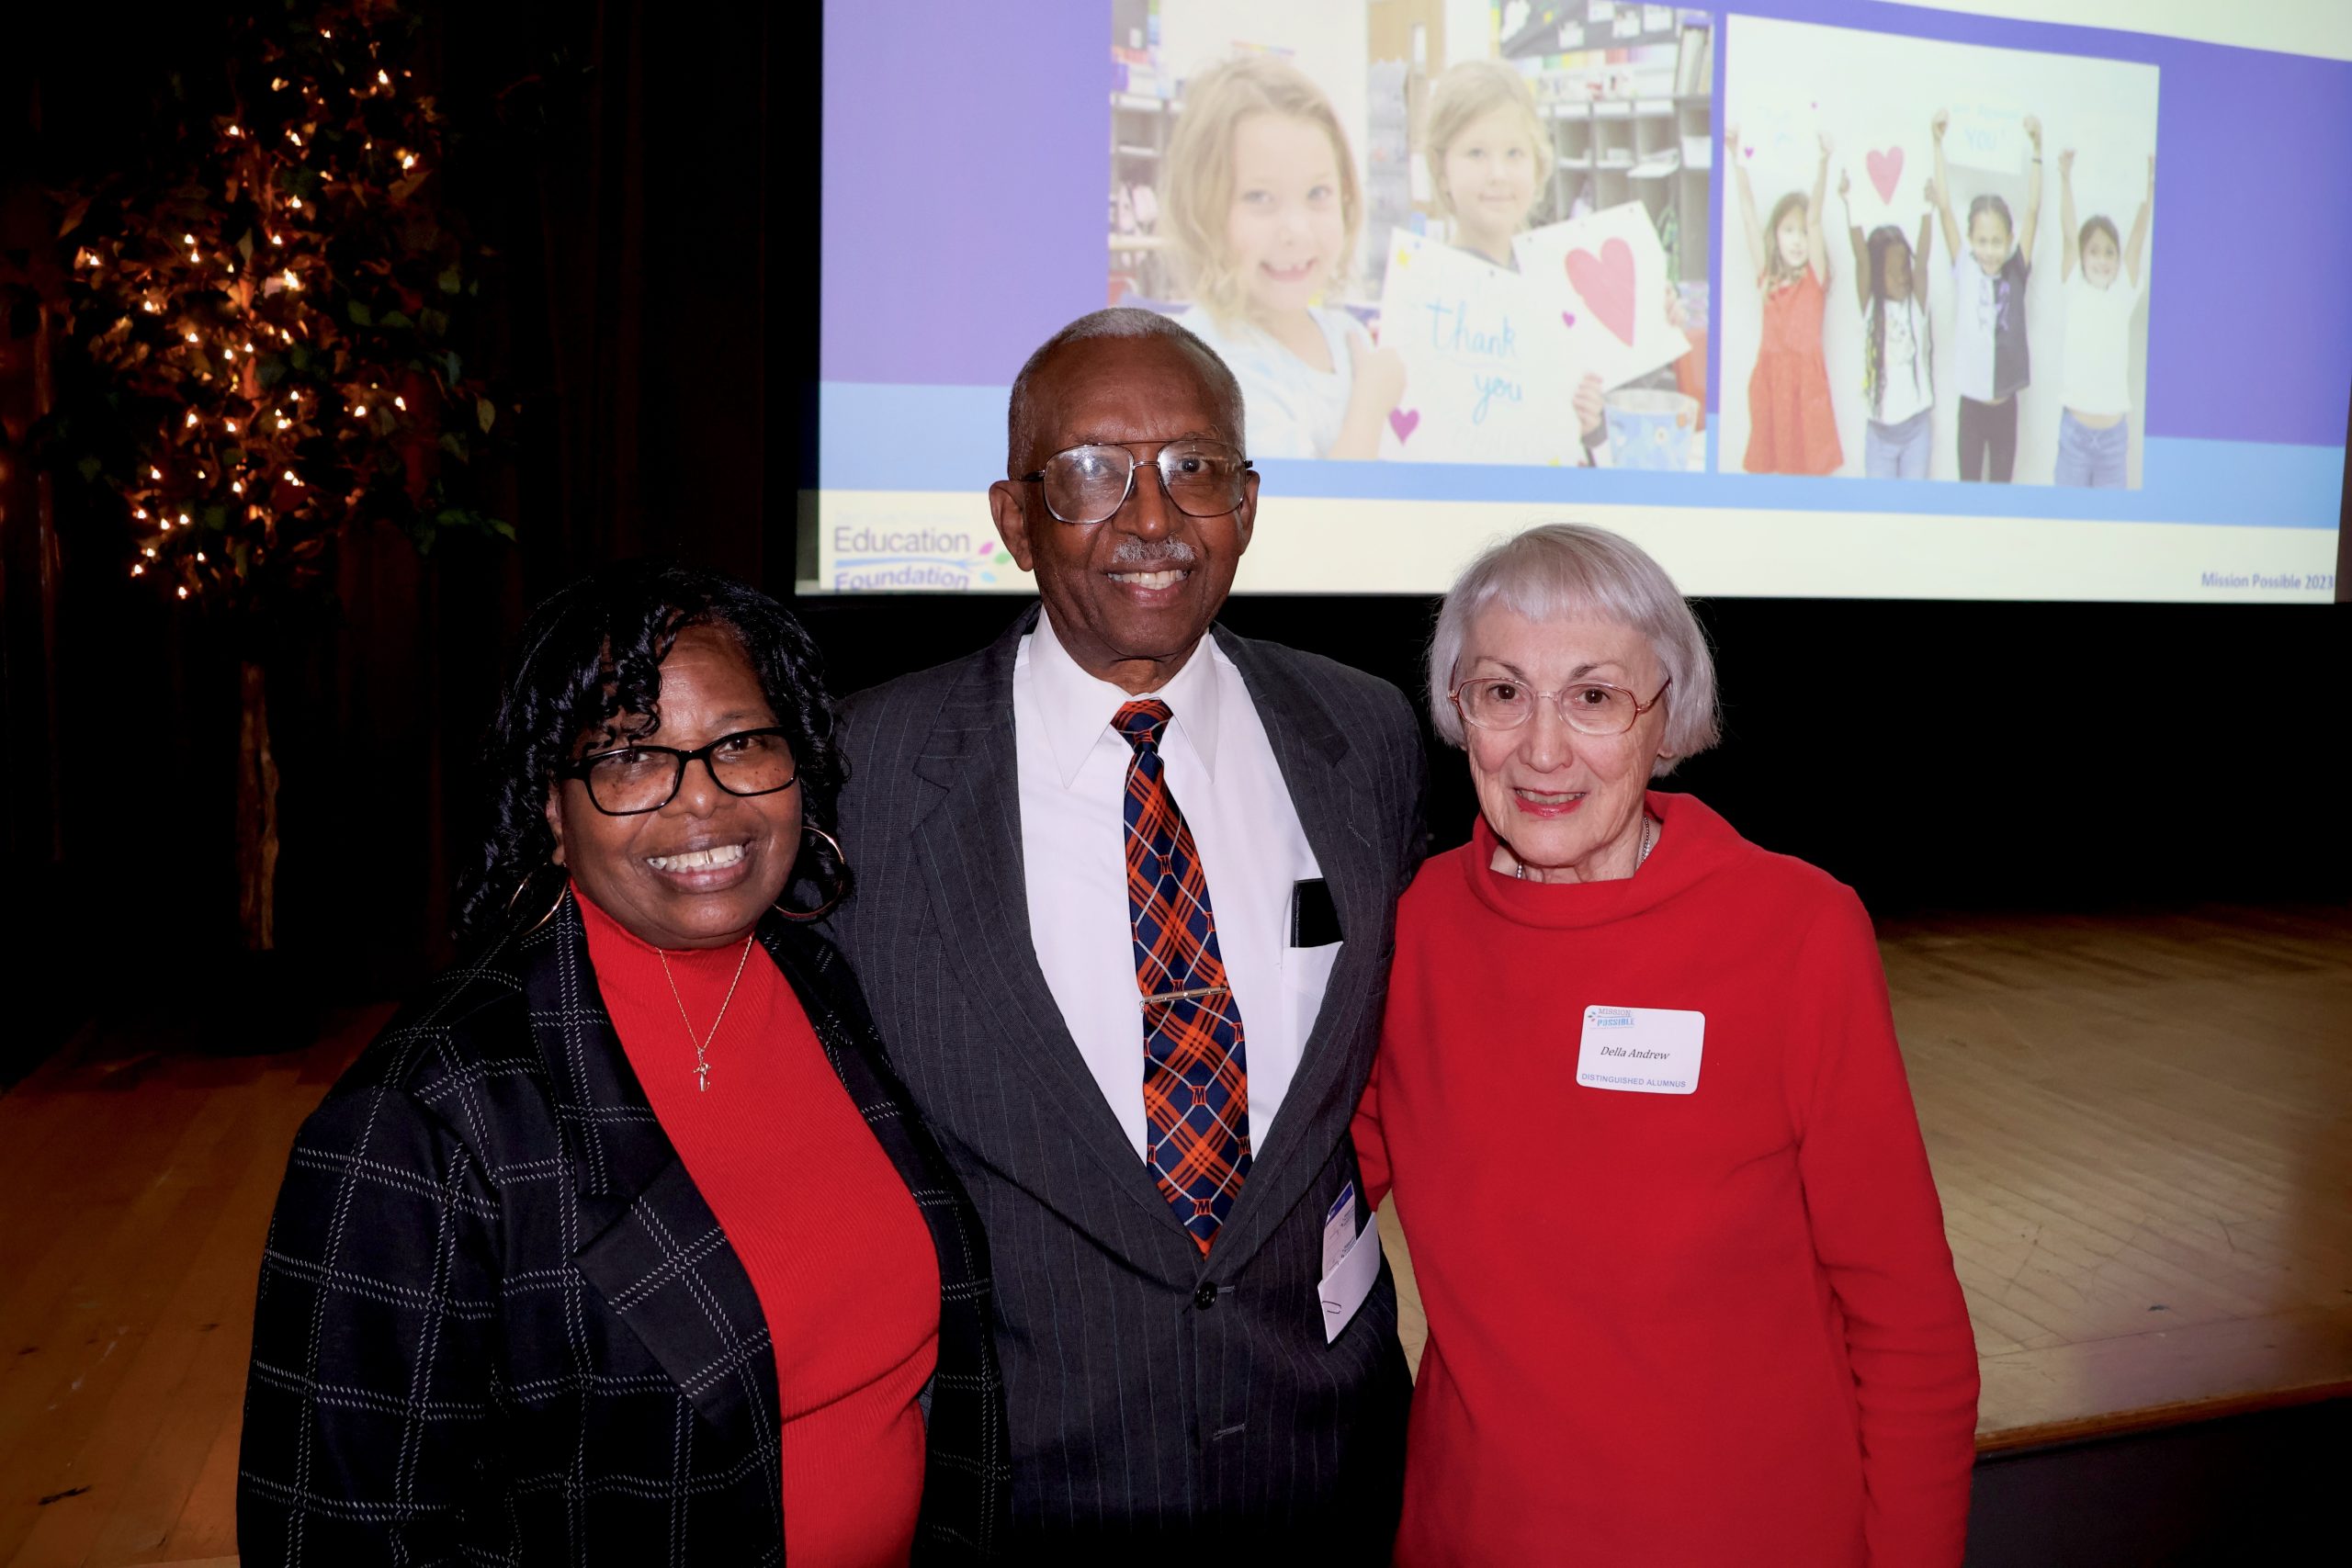 TCPS Education Foundation Event Honors Alumni - Talbot County Public Schools